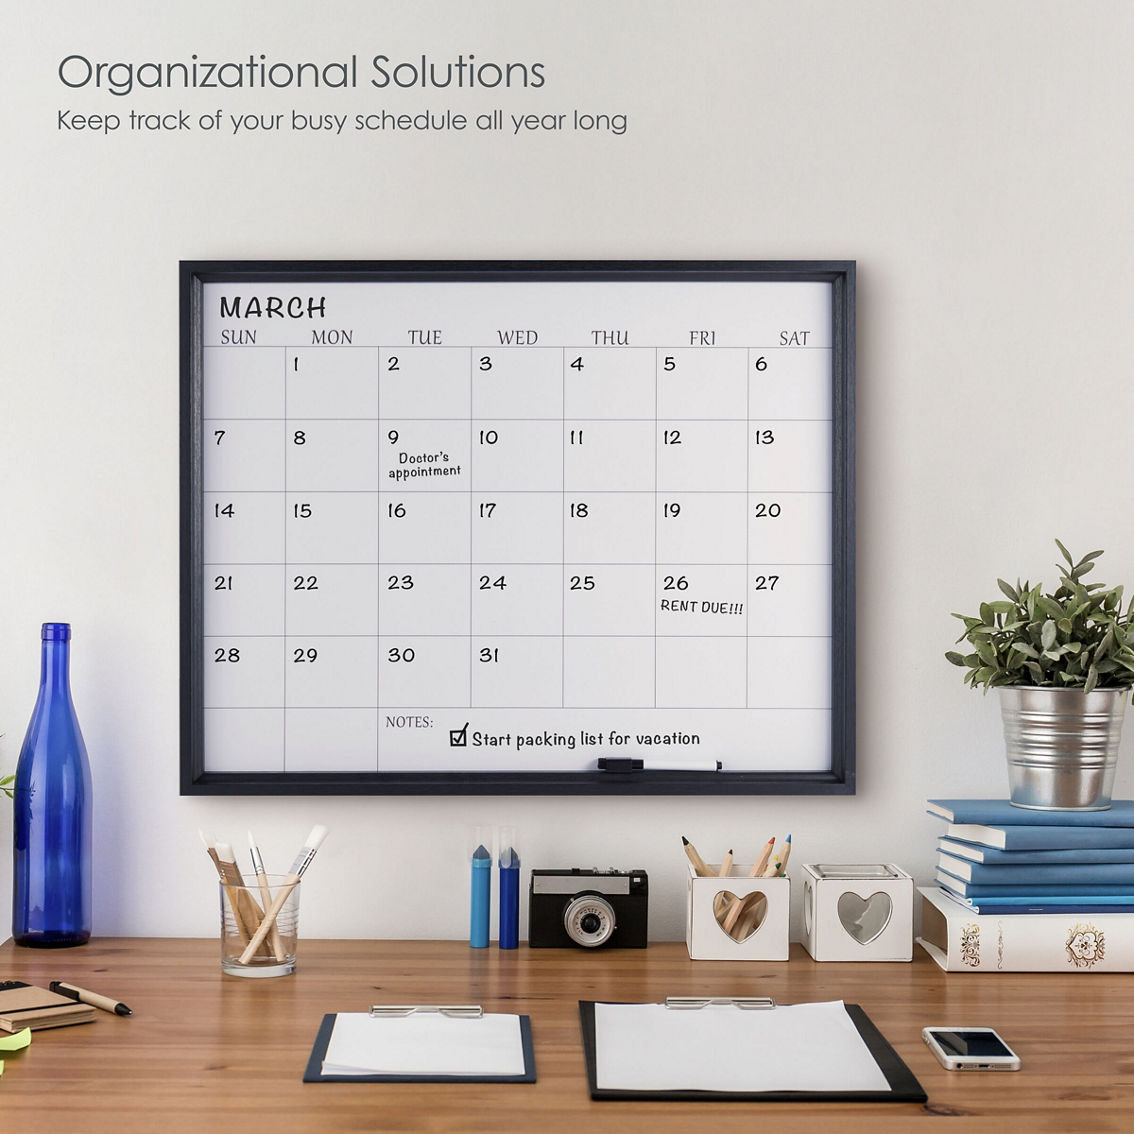 Towle Living 24 x 19 in. Black Calendar Whiteboard with Dry Erase Pen - Image 3 of 5